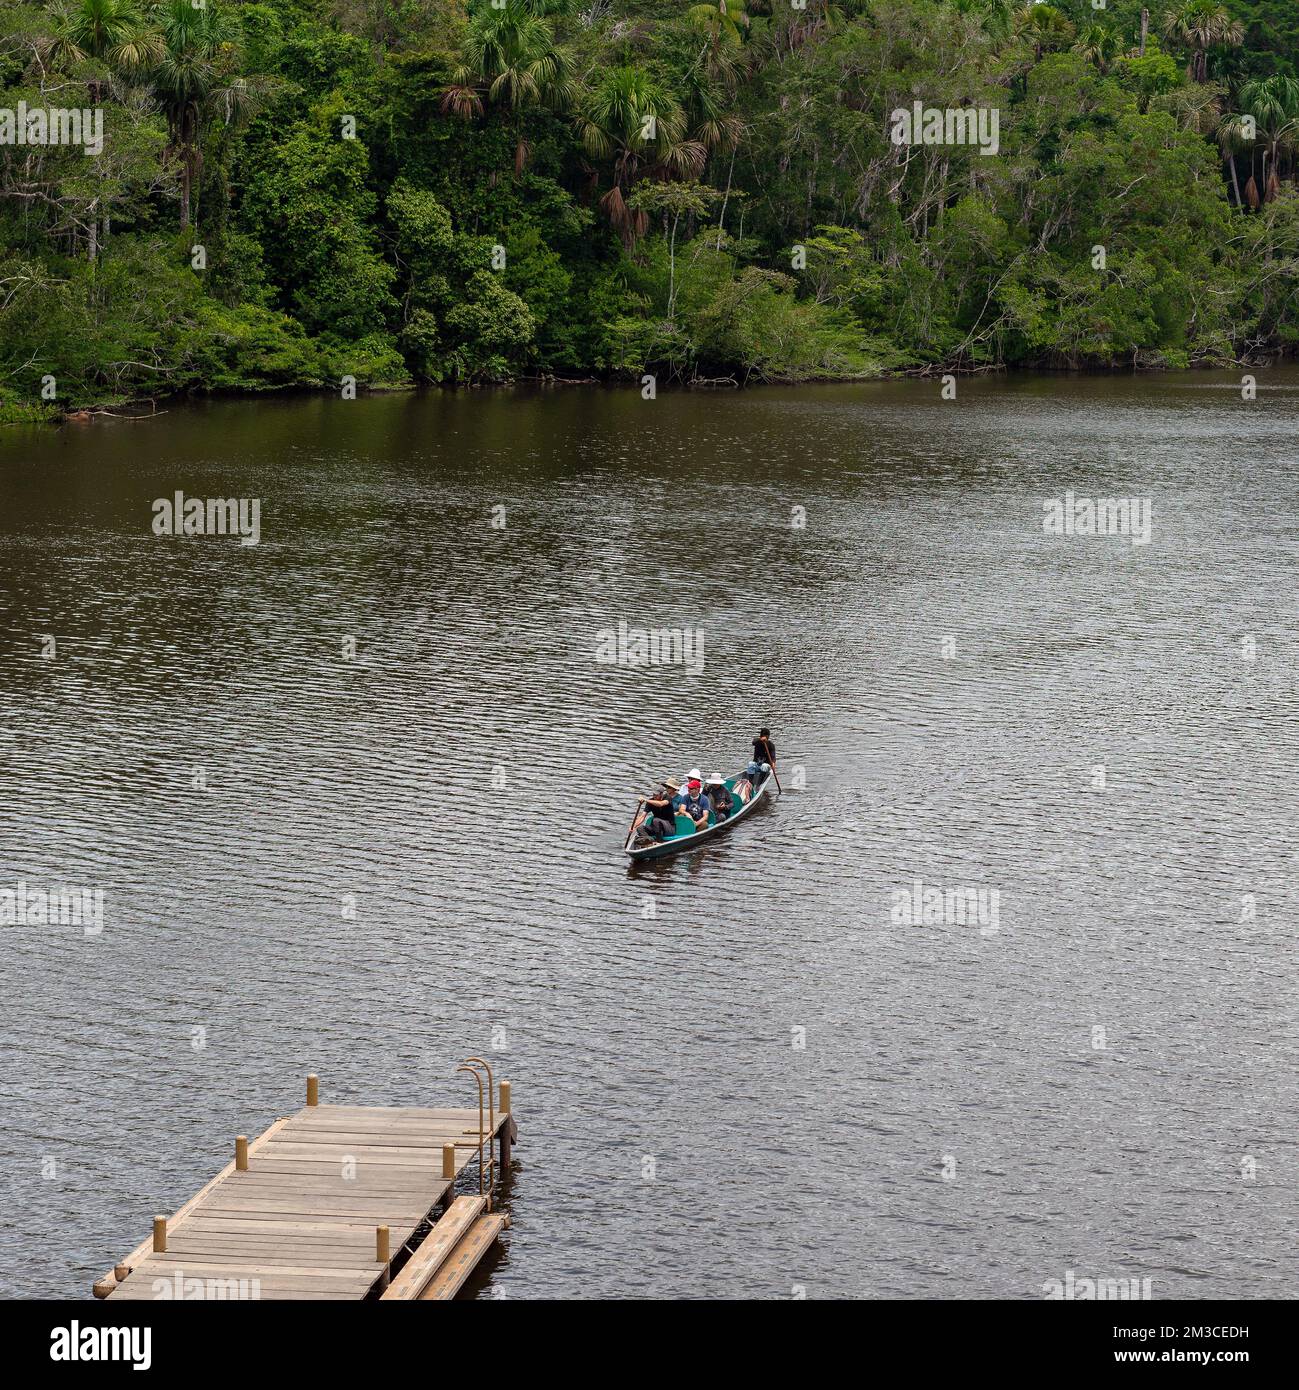 Arrival of a tourist group by canoe in hotel lodge in the Amazon rainforest, Yasuni national park, Ecuador. Stock Photo